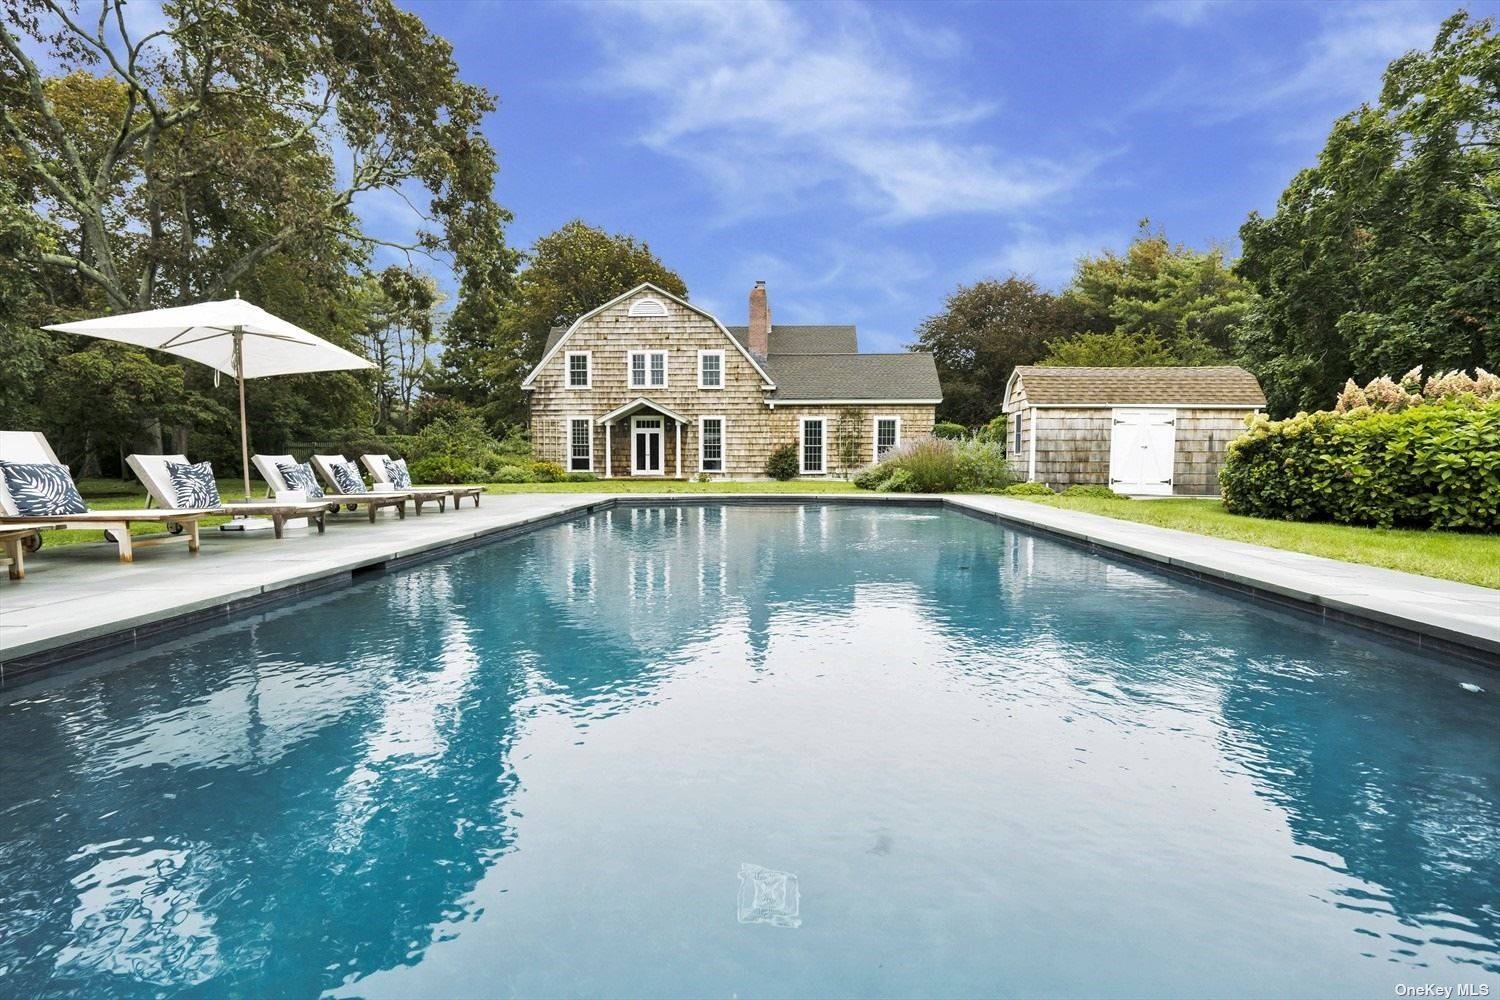 GORGEOUS QUOGUE TRADITIONAL Magnificent 4 BR 5 BA home in the Estate section of Quogue with plenty of living space.